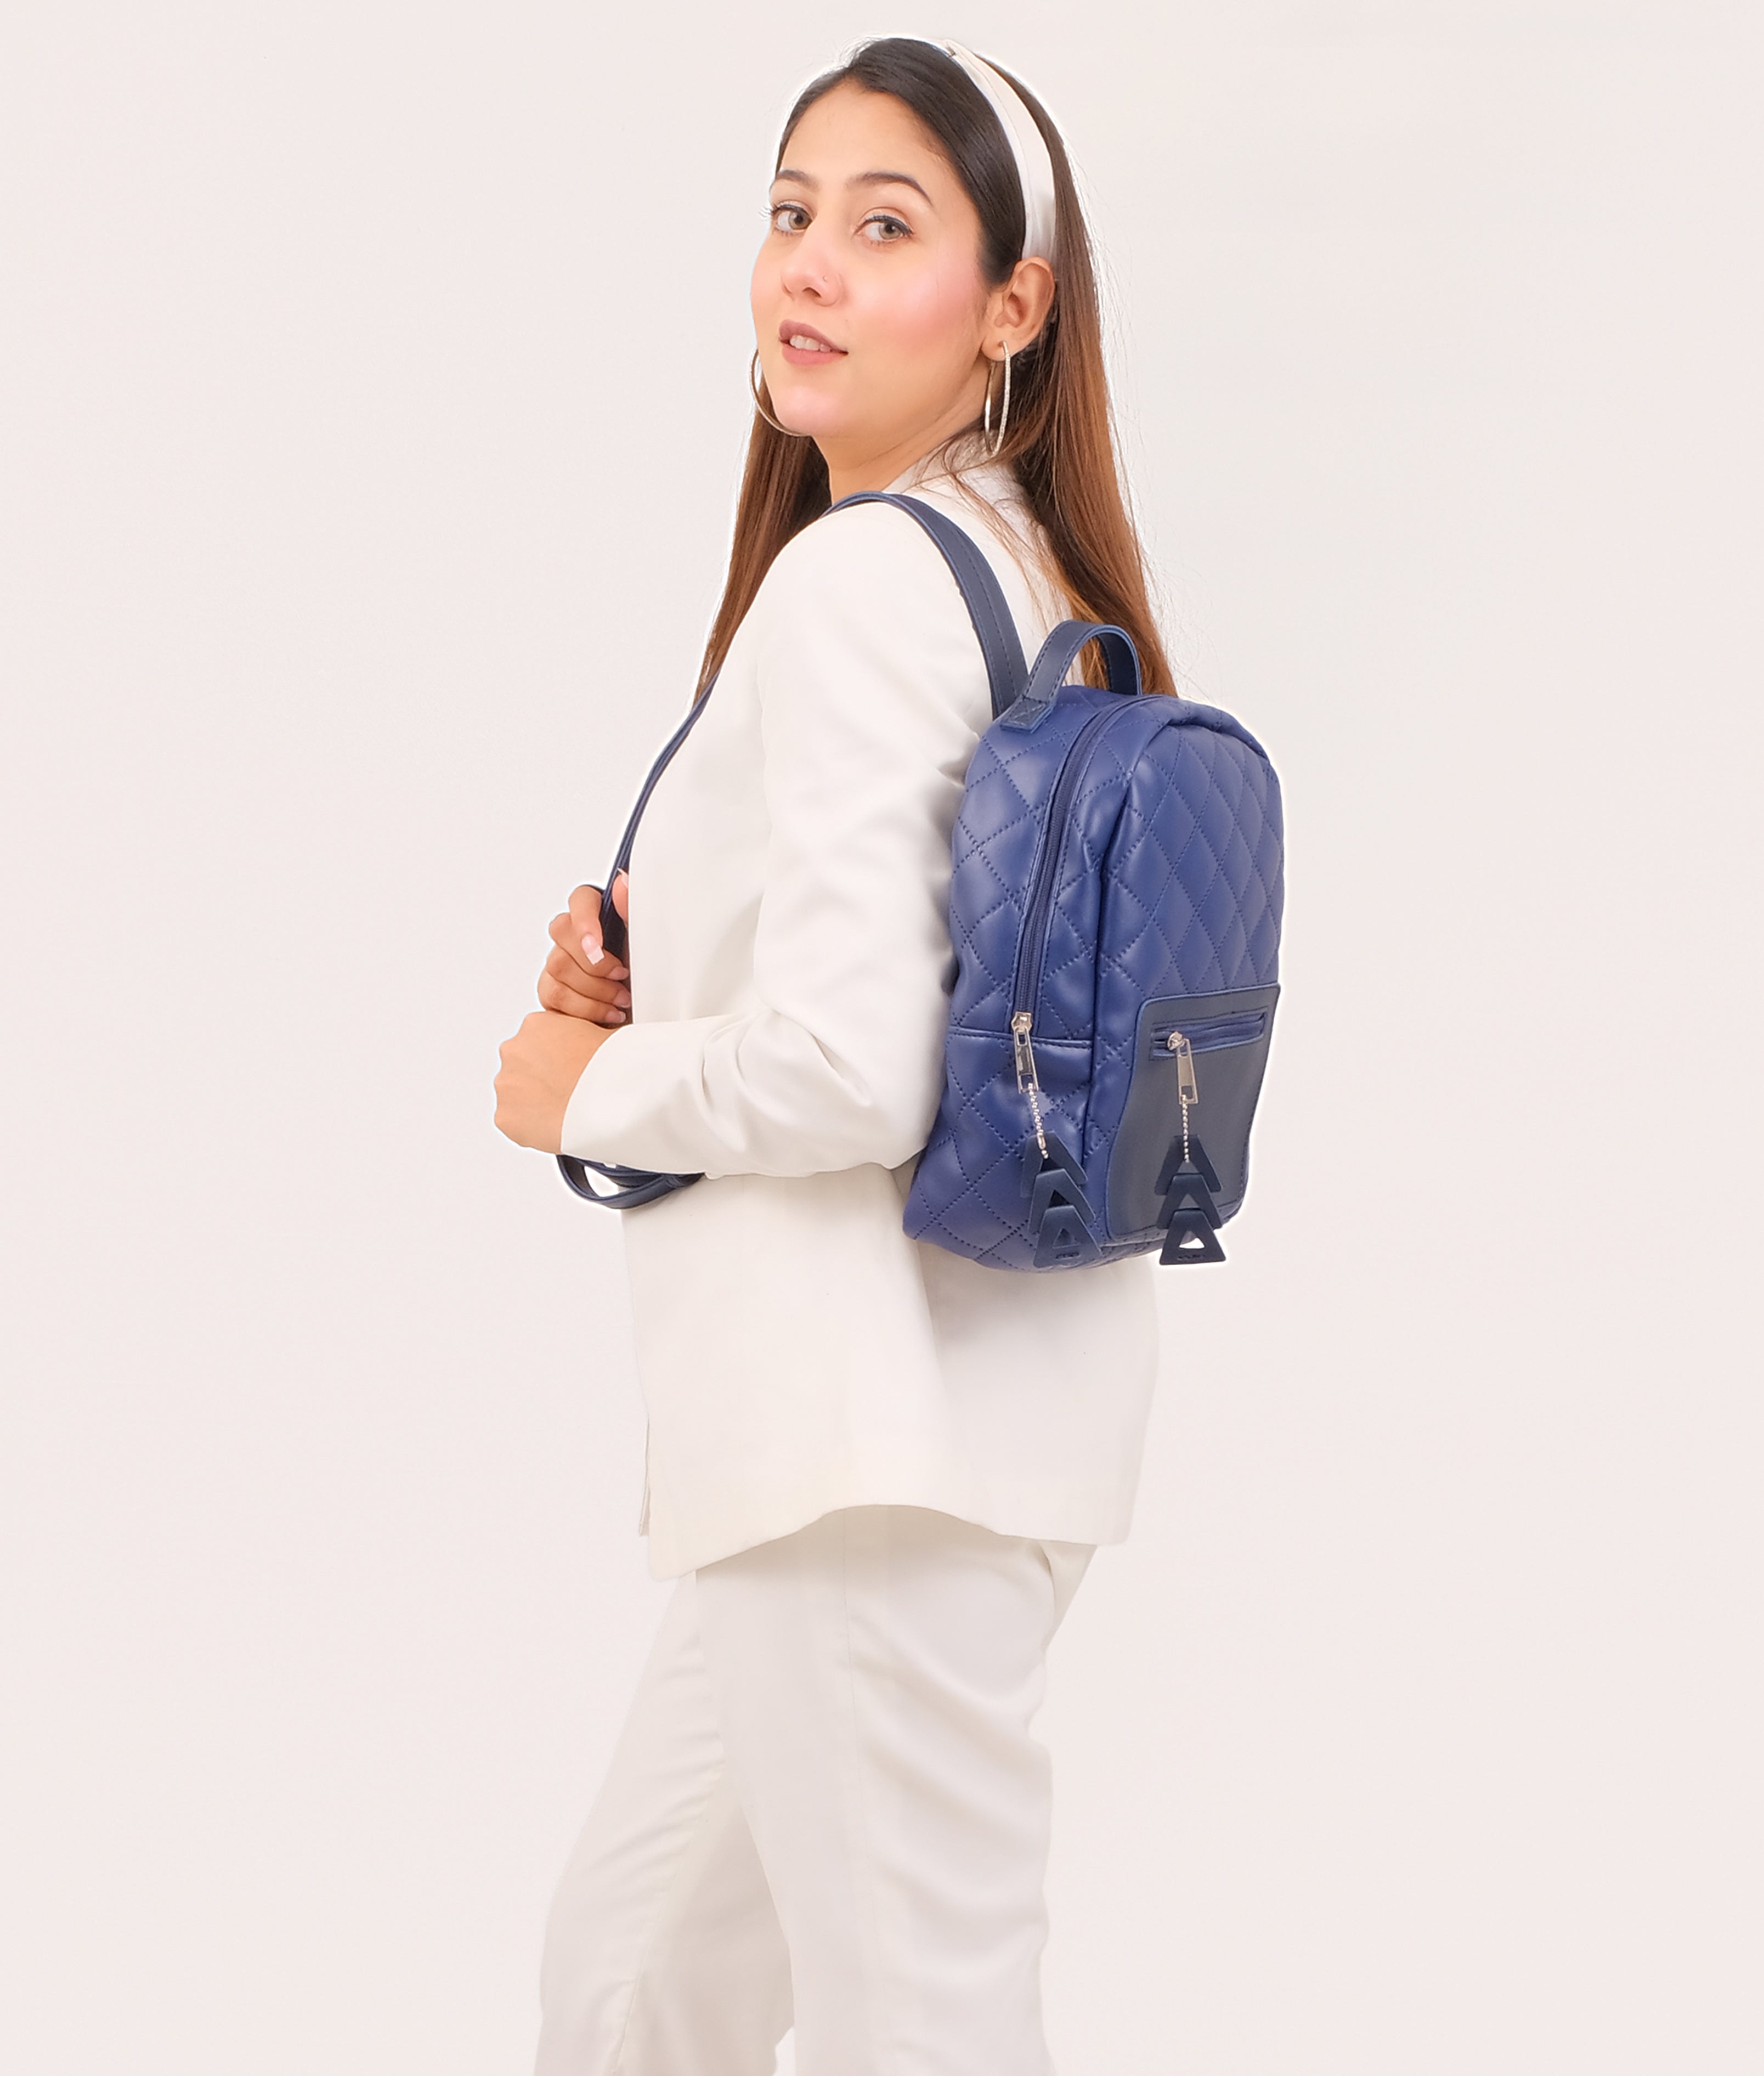 Blue quilted mini backpack